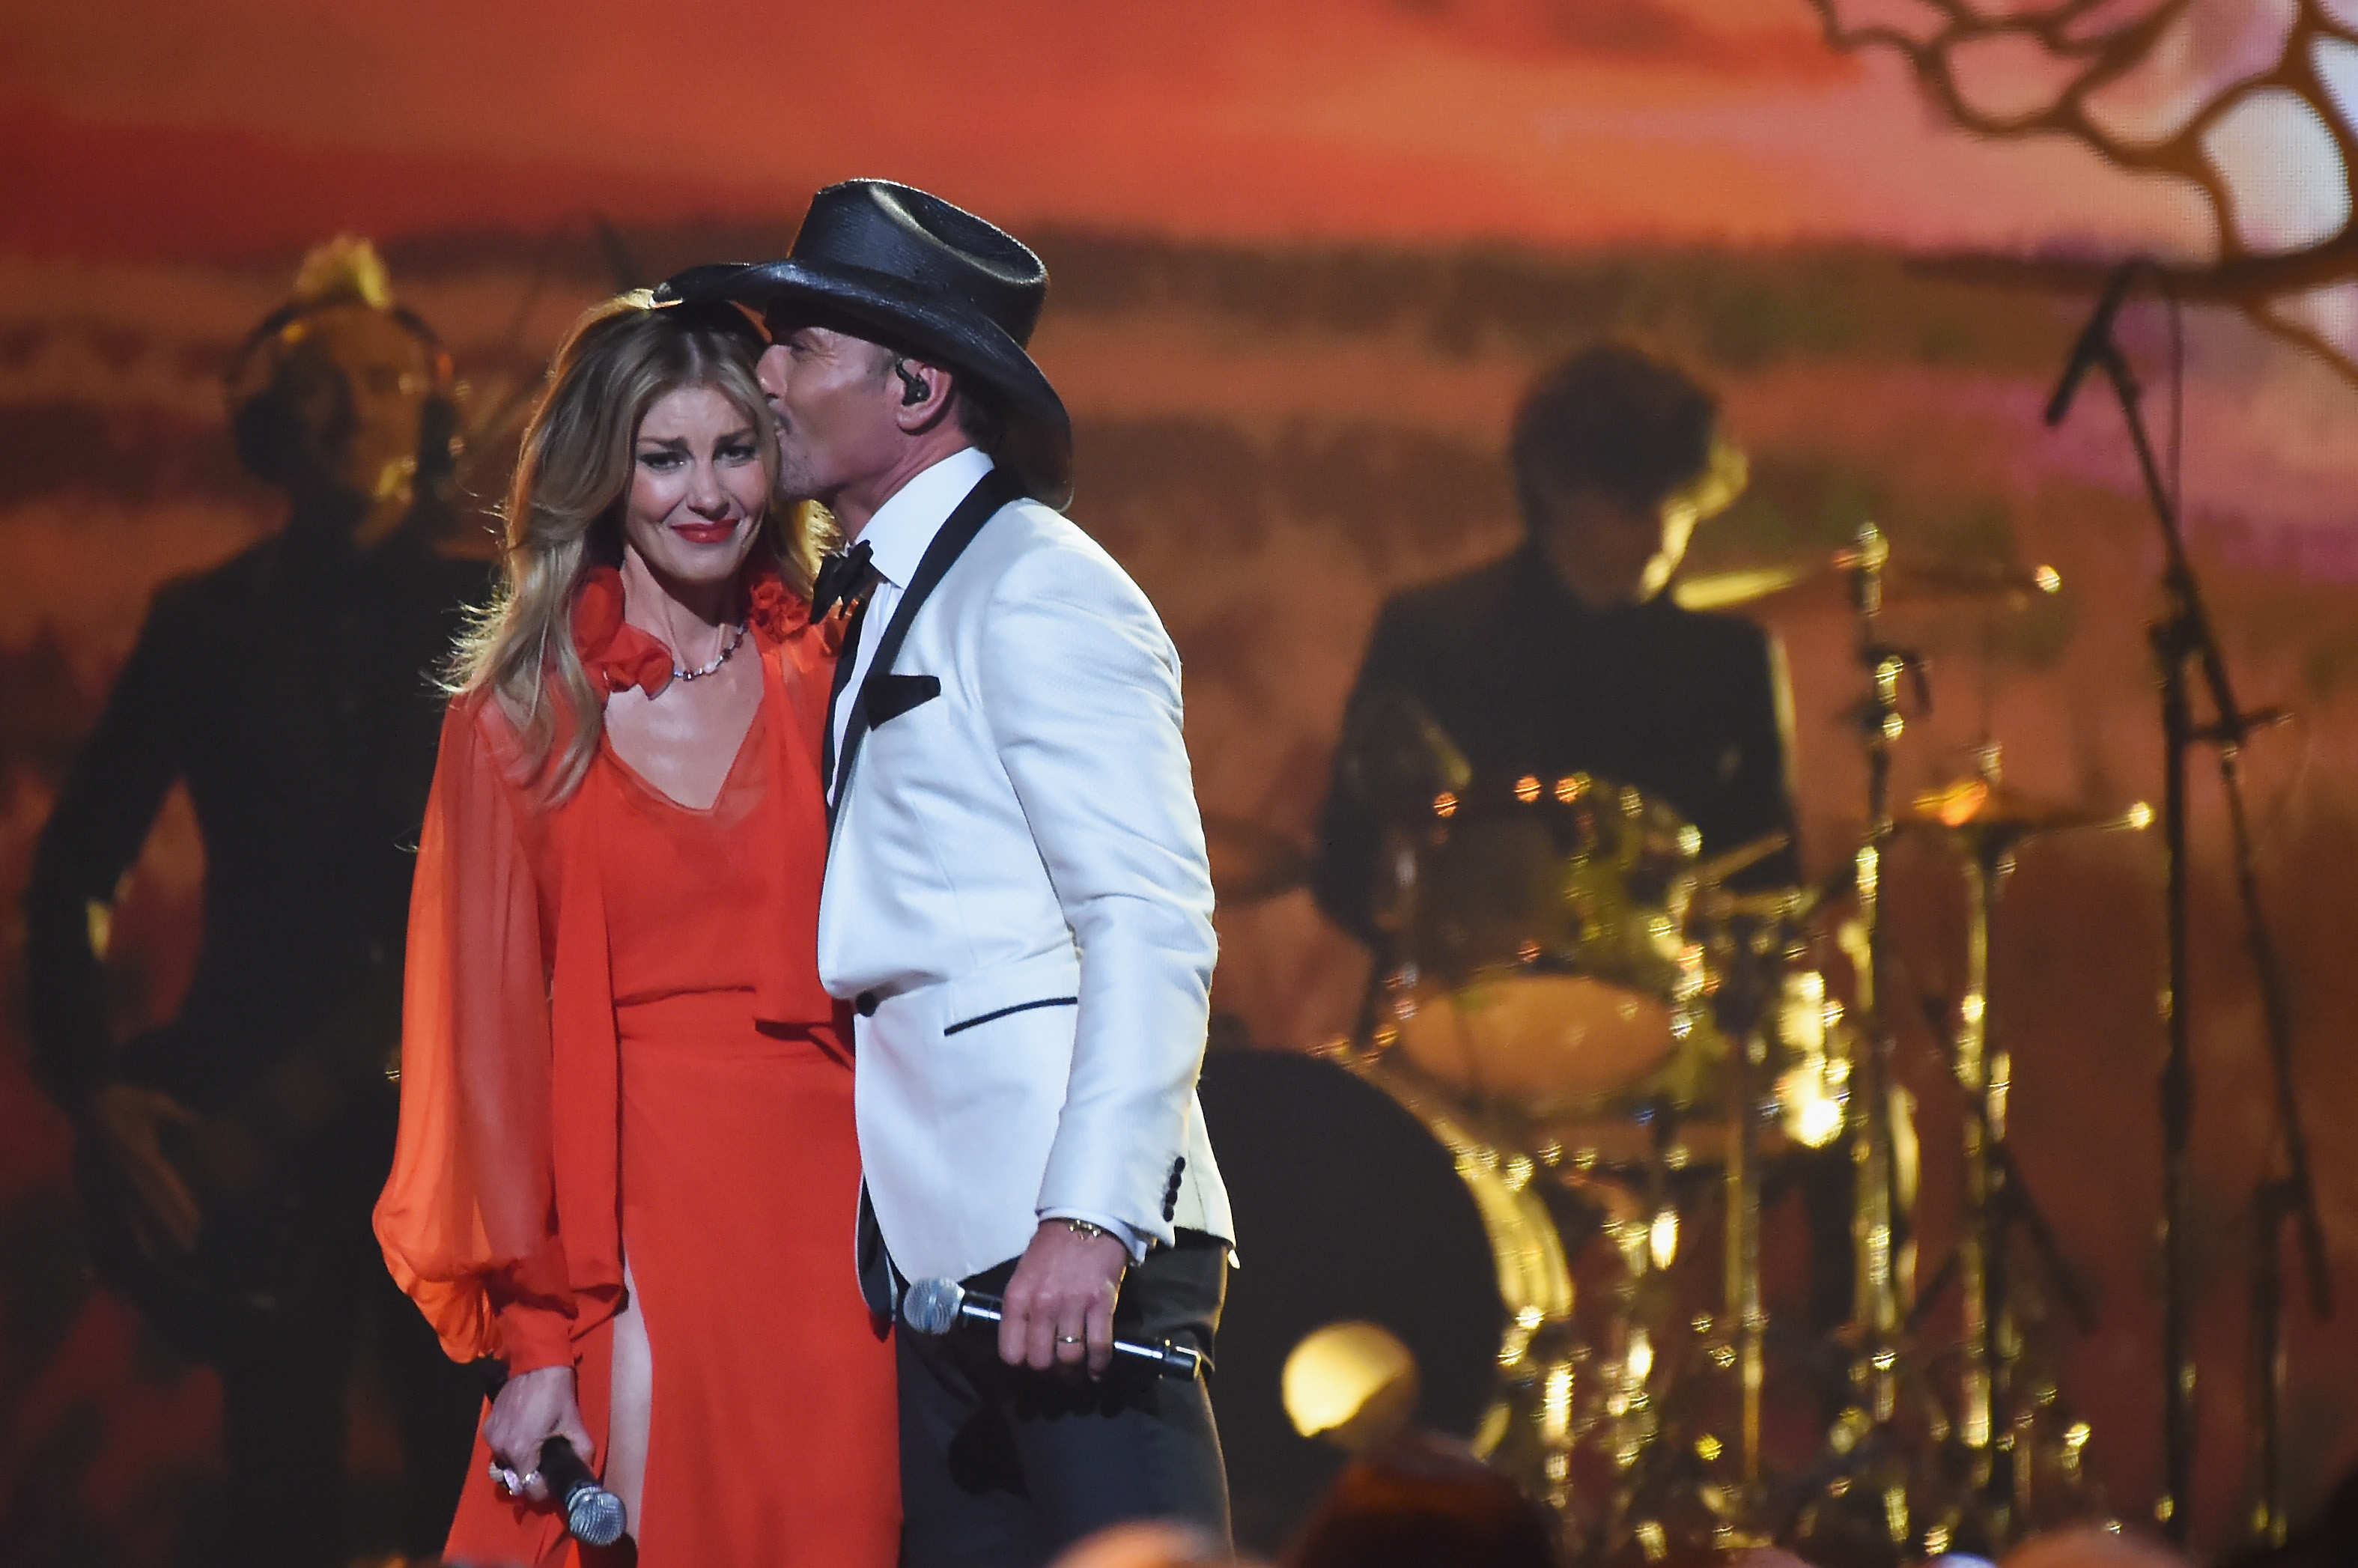 Faith Hill and Tim McGraw perform onstage at the 51st annual CMA Awards in Nashville, Tennessee on November 8, 2017. | Source: Getty Images